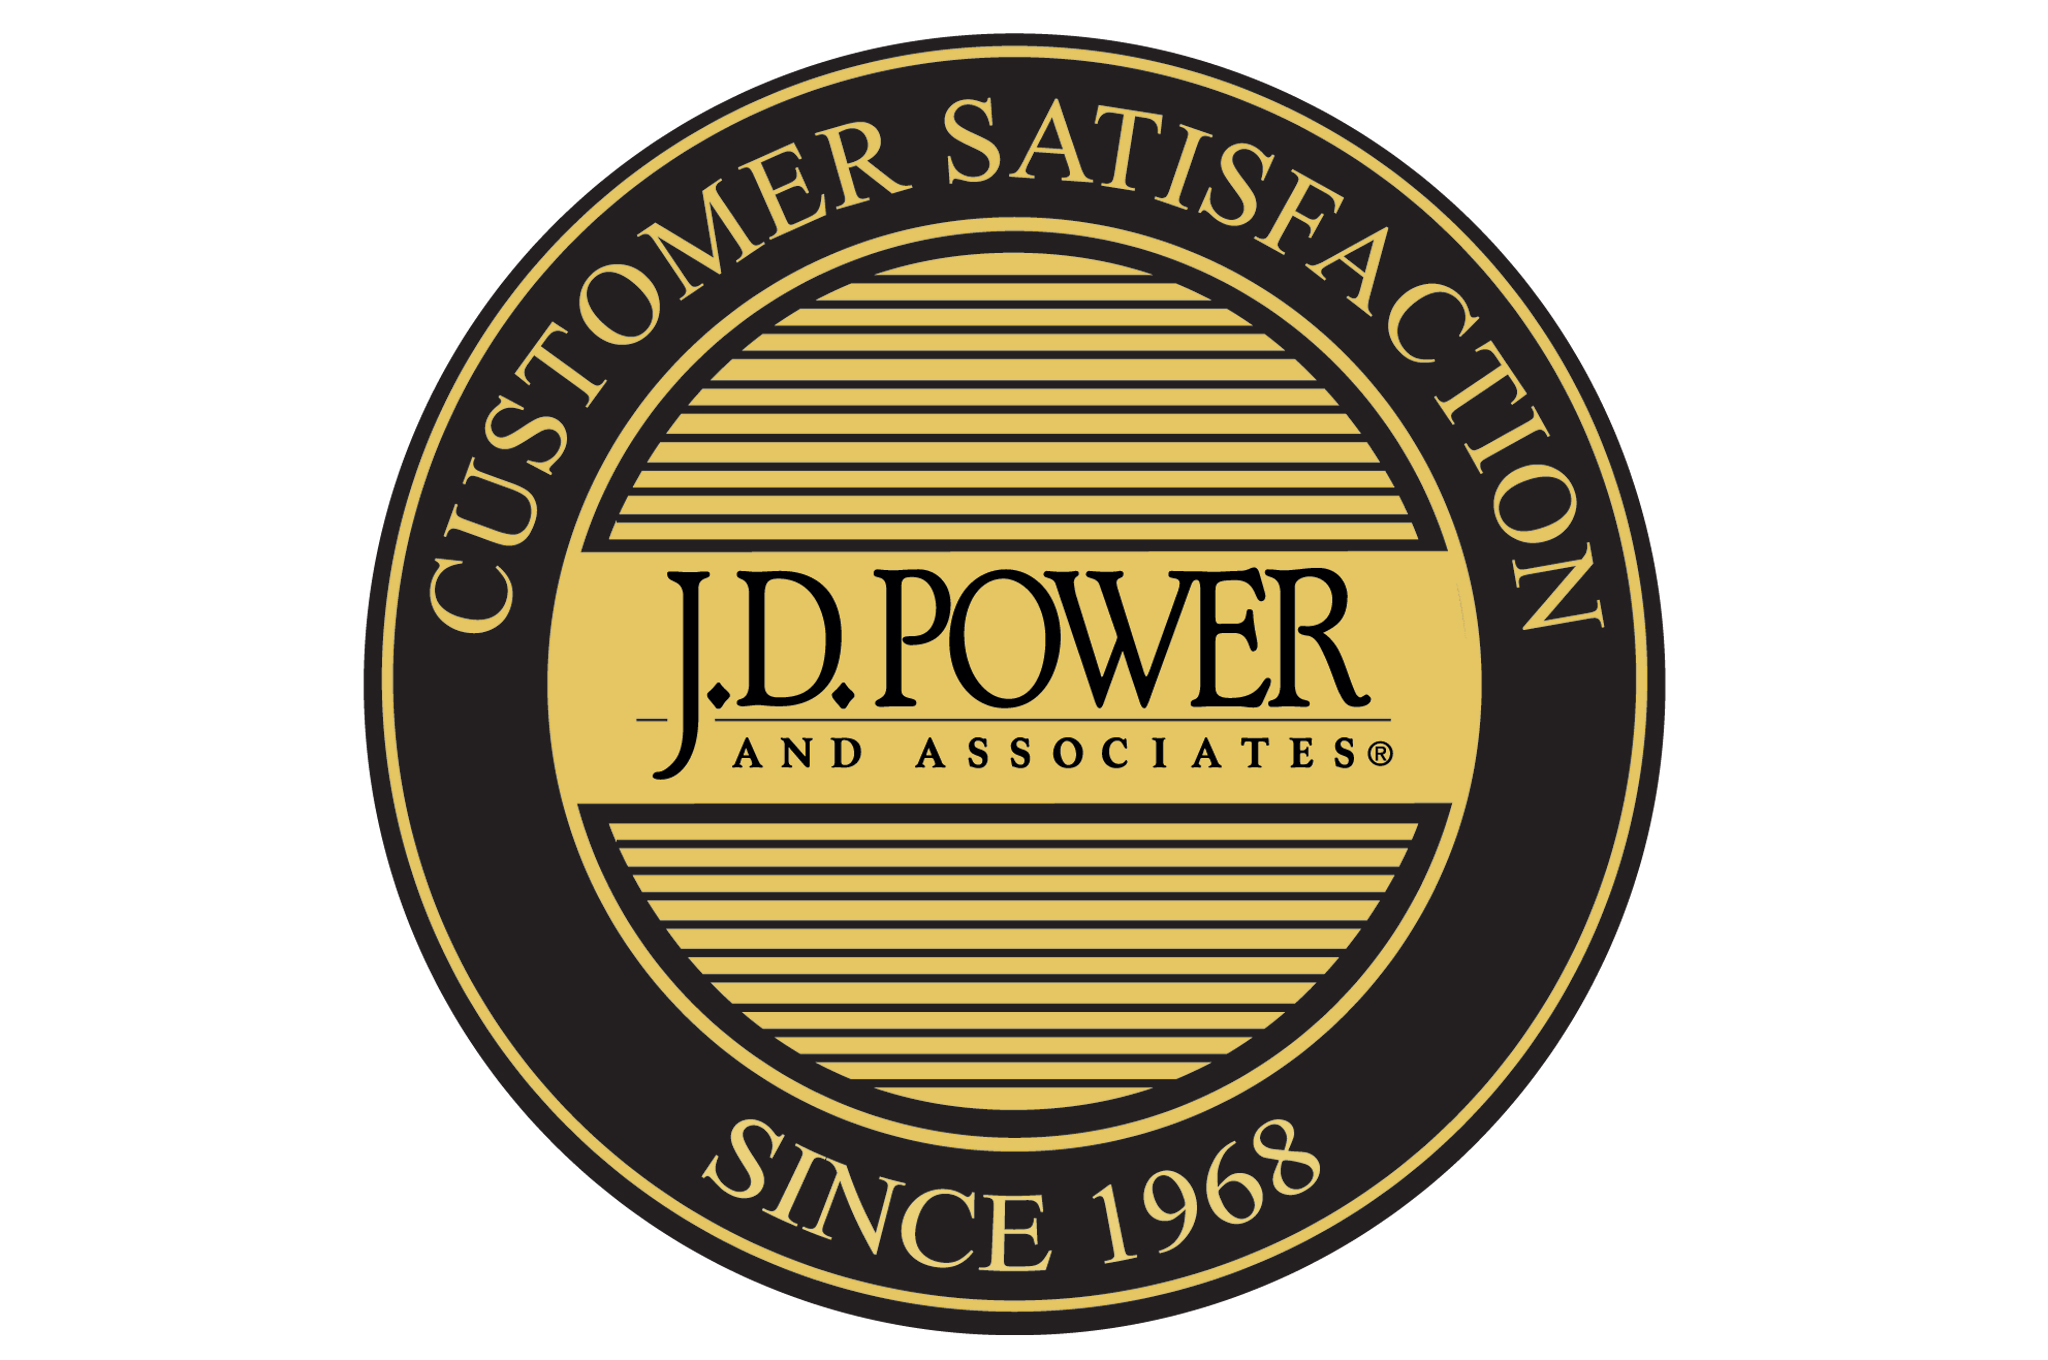 J.D. Power ranks NYCM Insurance #1 in Customer Satisfaction Among Auto Insurers in New York and Best in Price.